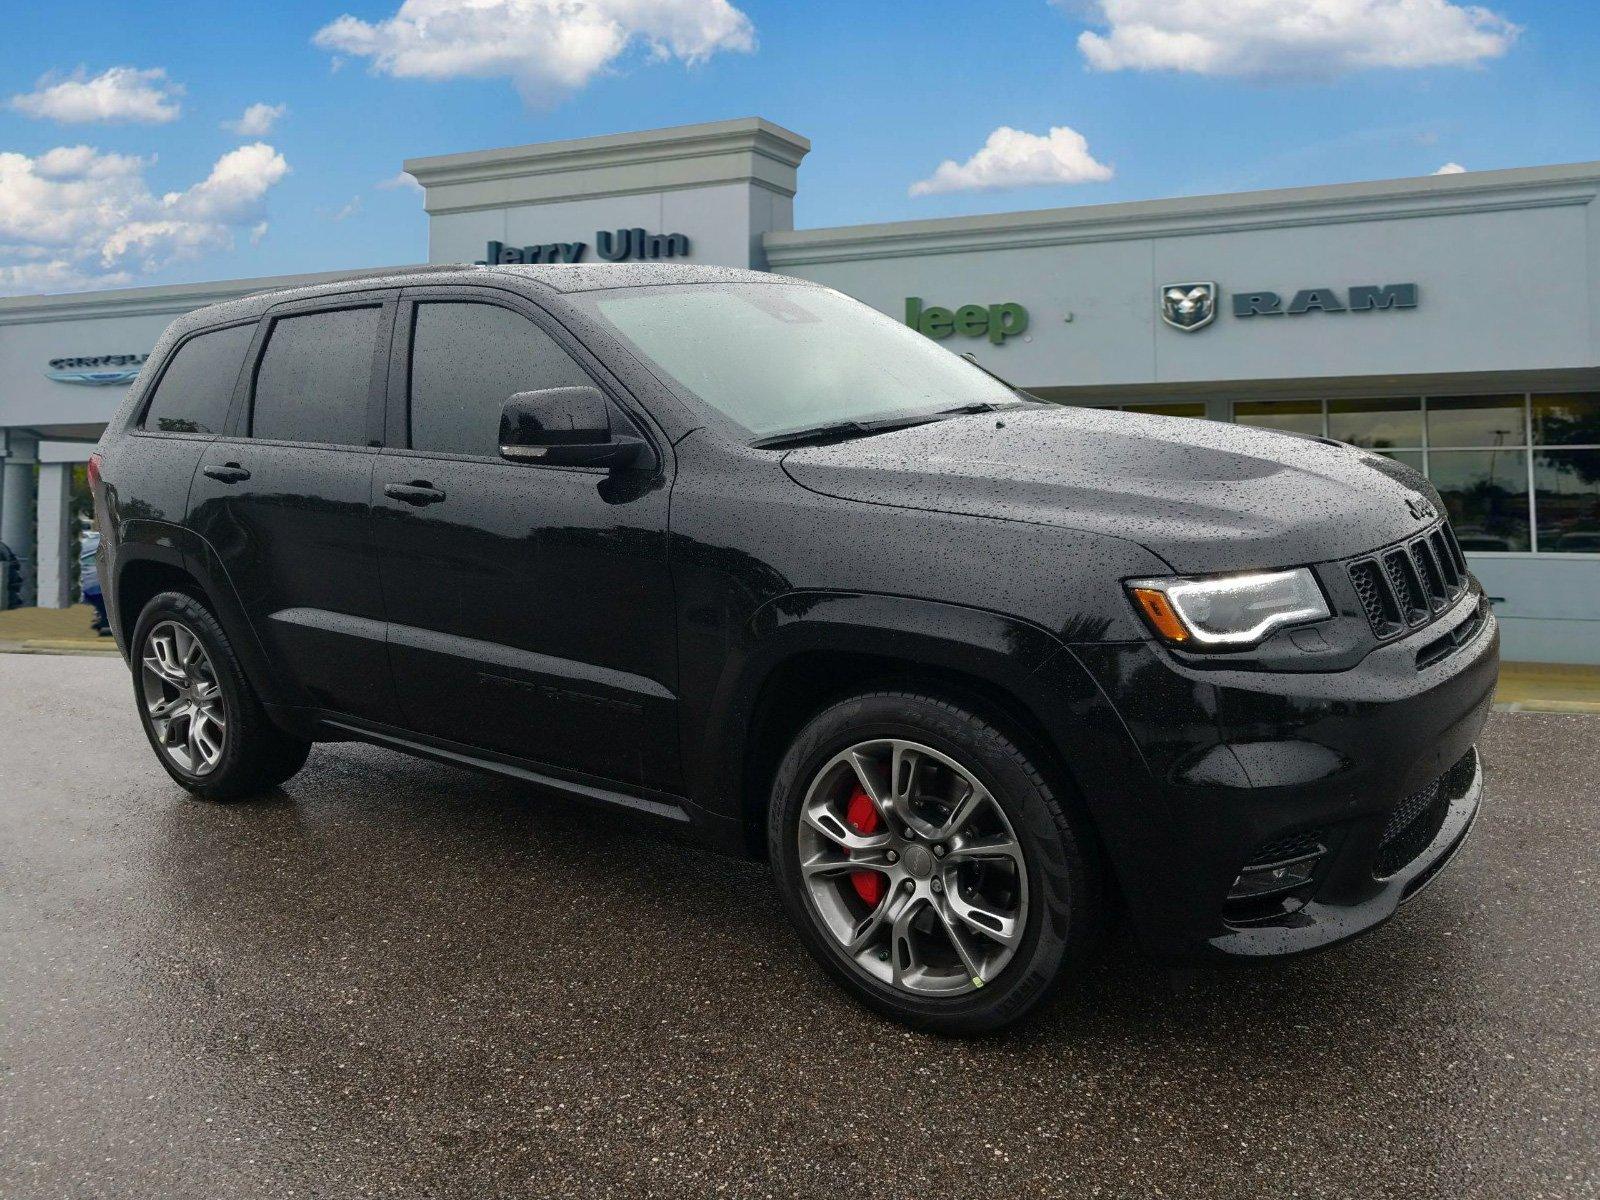 New 2019 JEEP Grand Cherokee SRT Sport Utility in Tampa #C604161